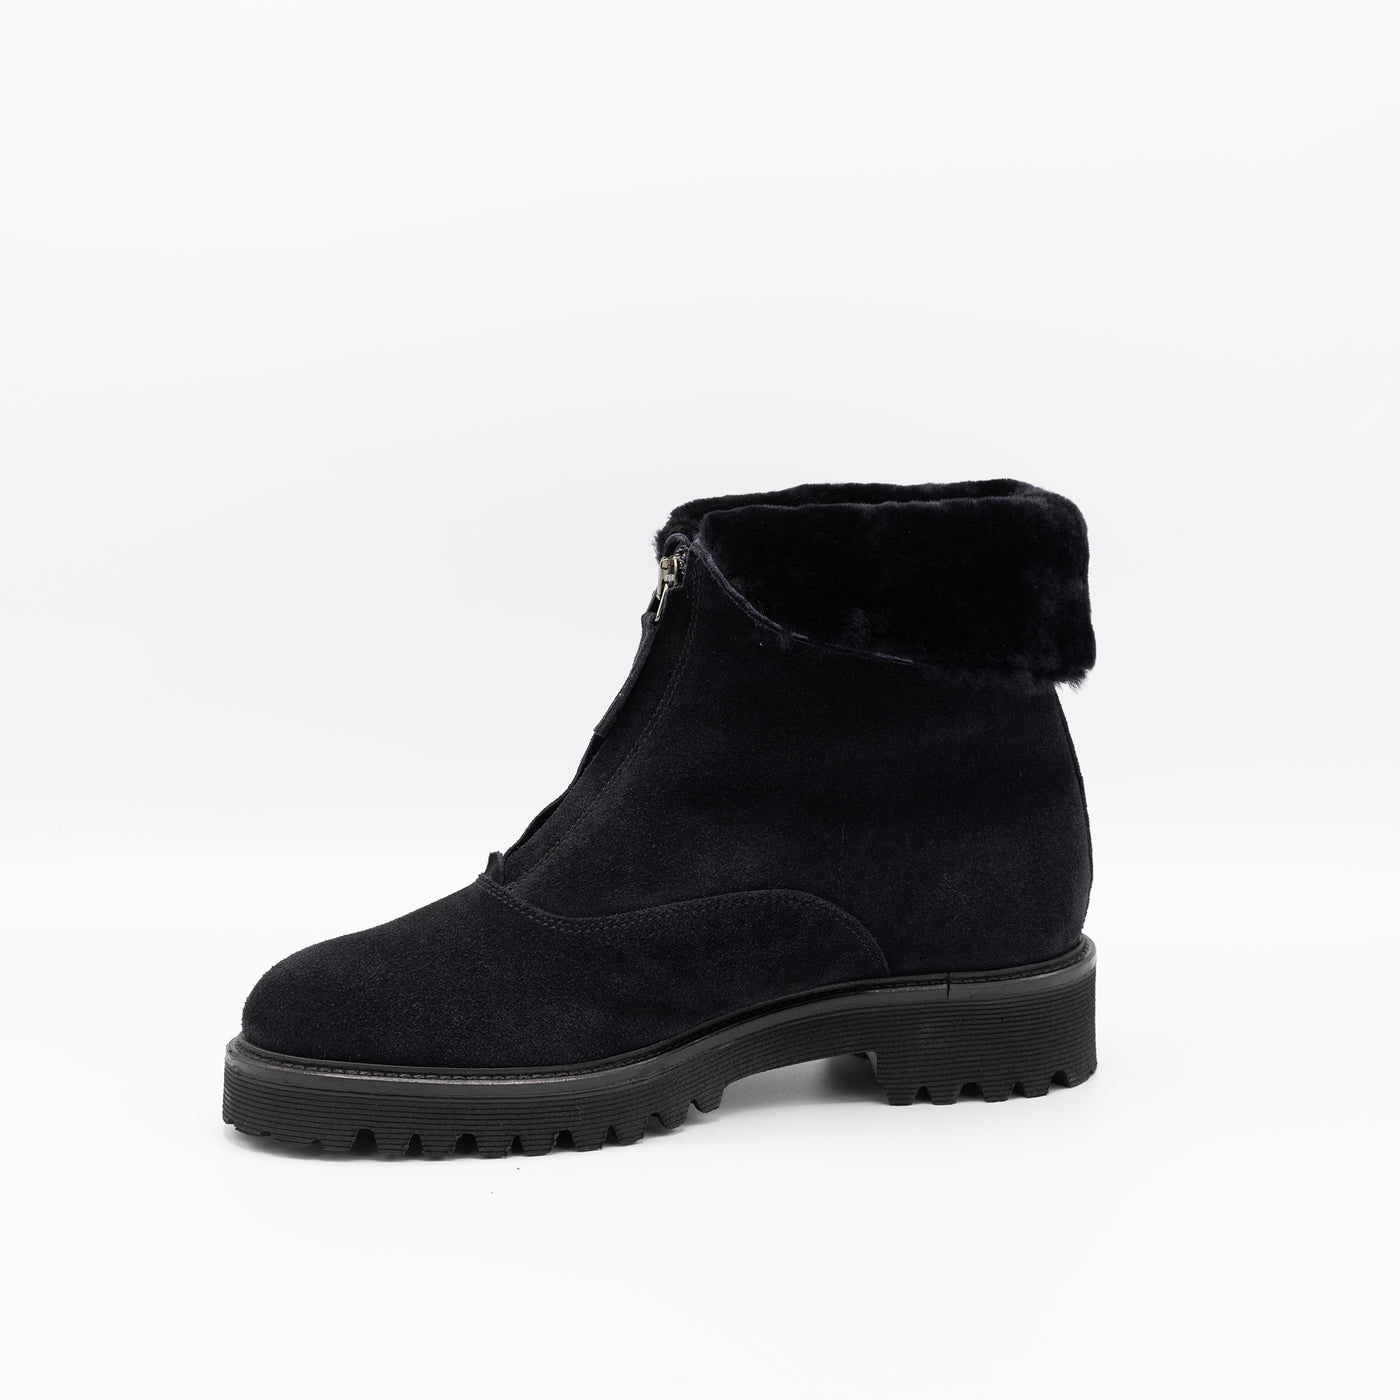 Zip Up Black Suede Shearling Boots